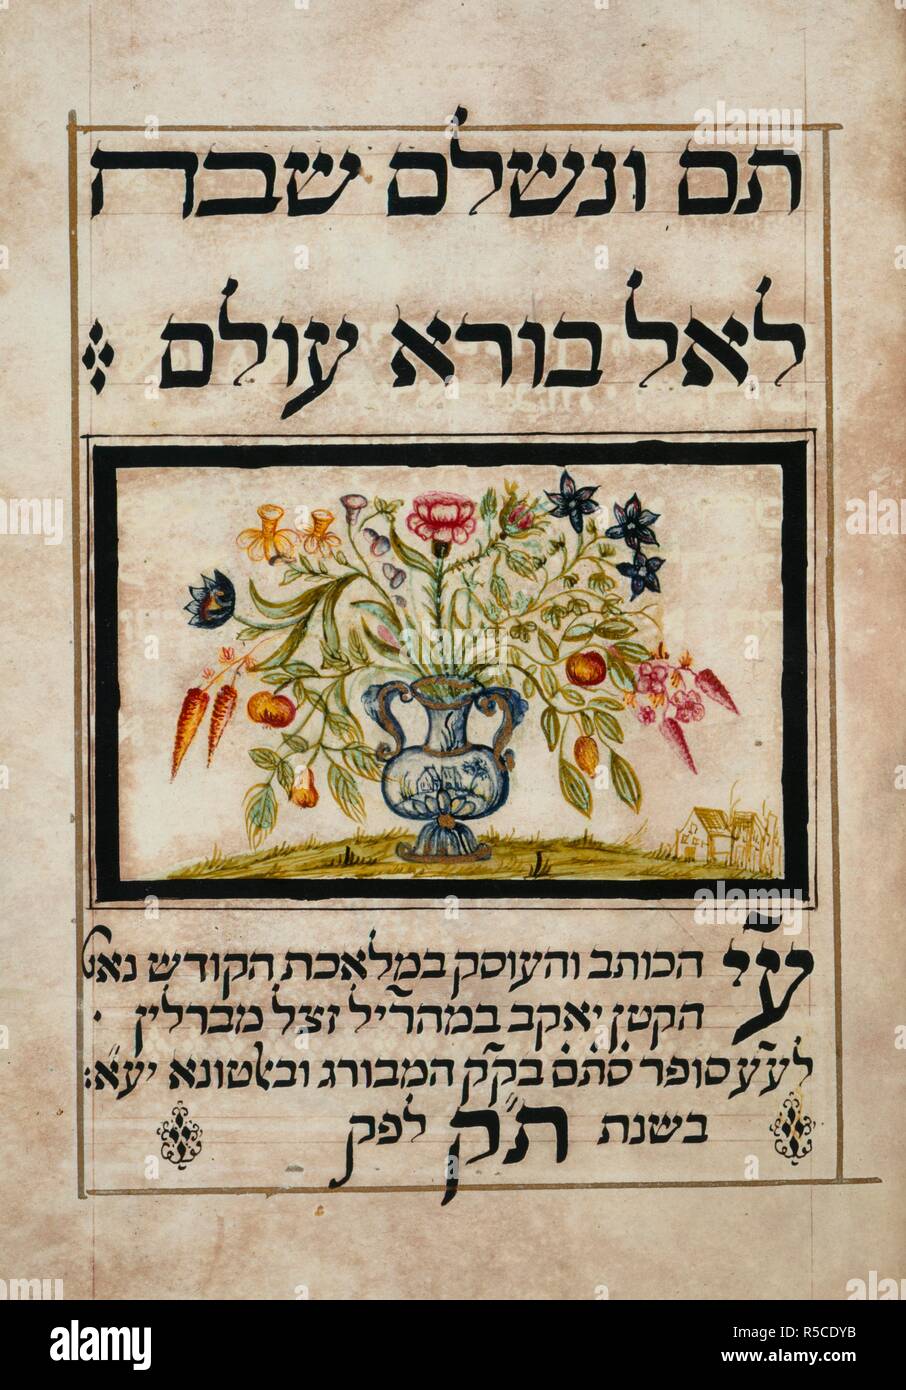 A decorated urn. Passover Haggadah. Hamburg and Altona, 1740. A decorated urn with flowers at the end of the Passover Haggadah .  Image taken from Passover Haggadah .  Originally published/produced in Hamburg and Altona, 1740 . . Source: Add. 18724, f.54. Language: Hebrew. Author: Jacob ben Judah Leib of Berlin. Stock Photo